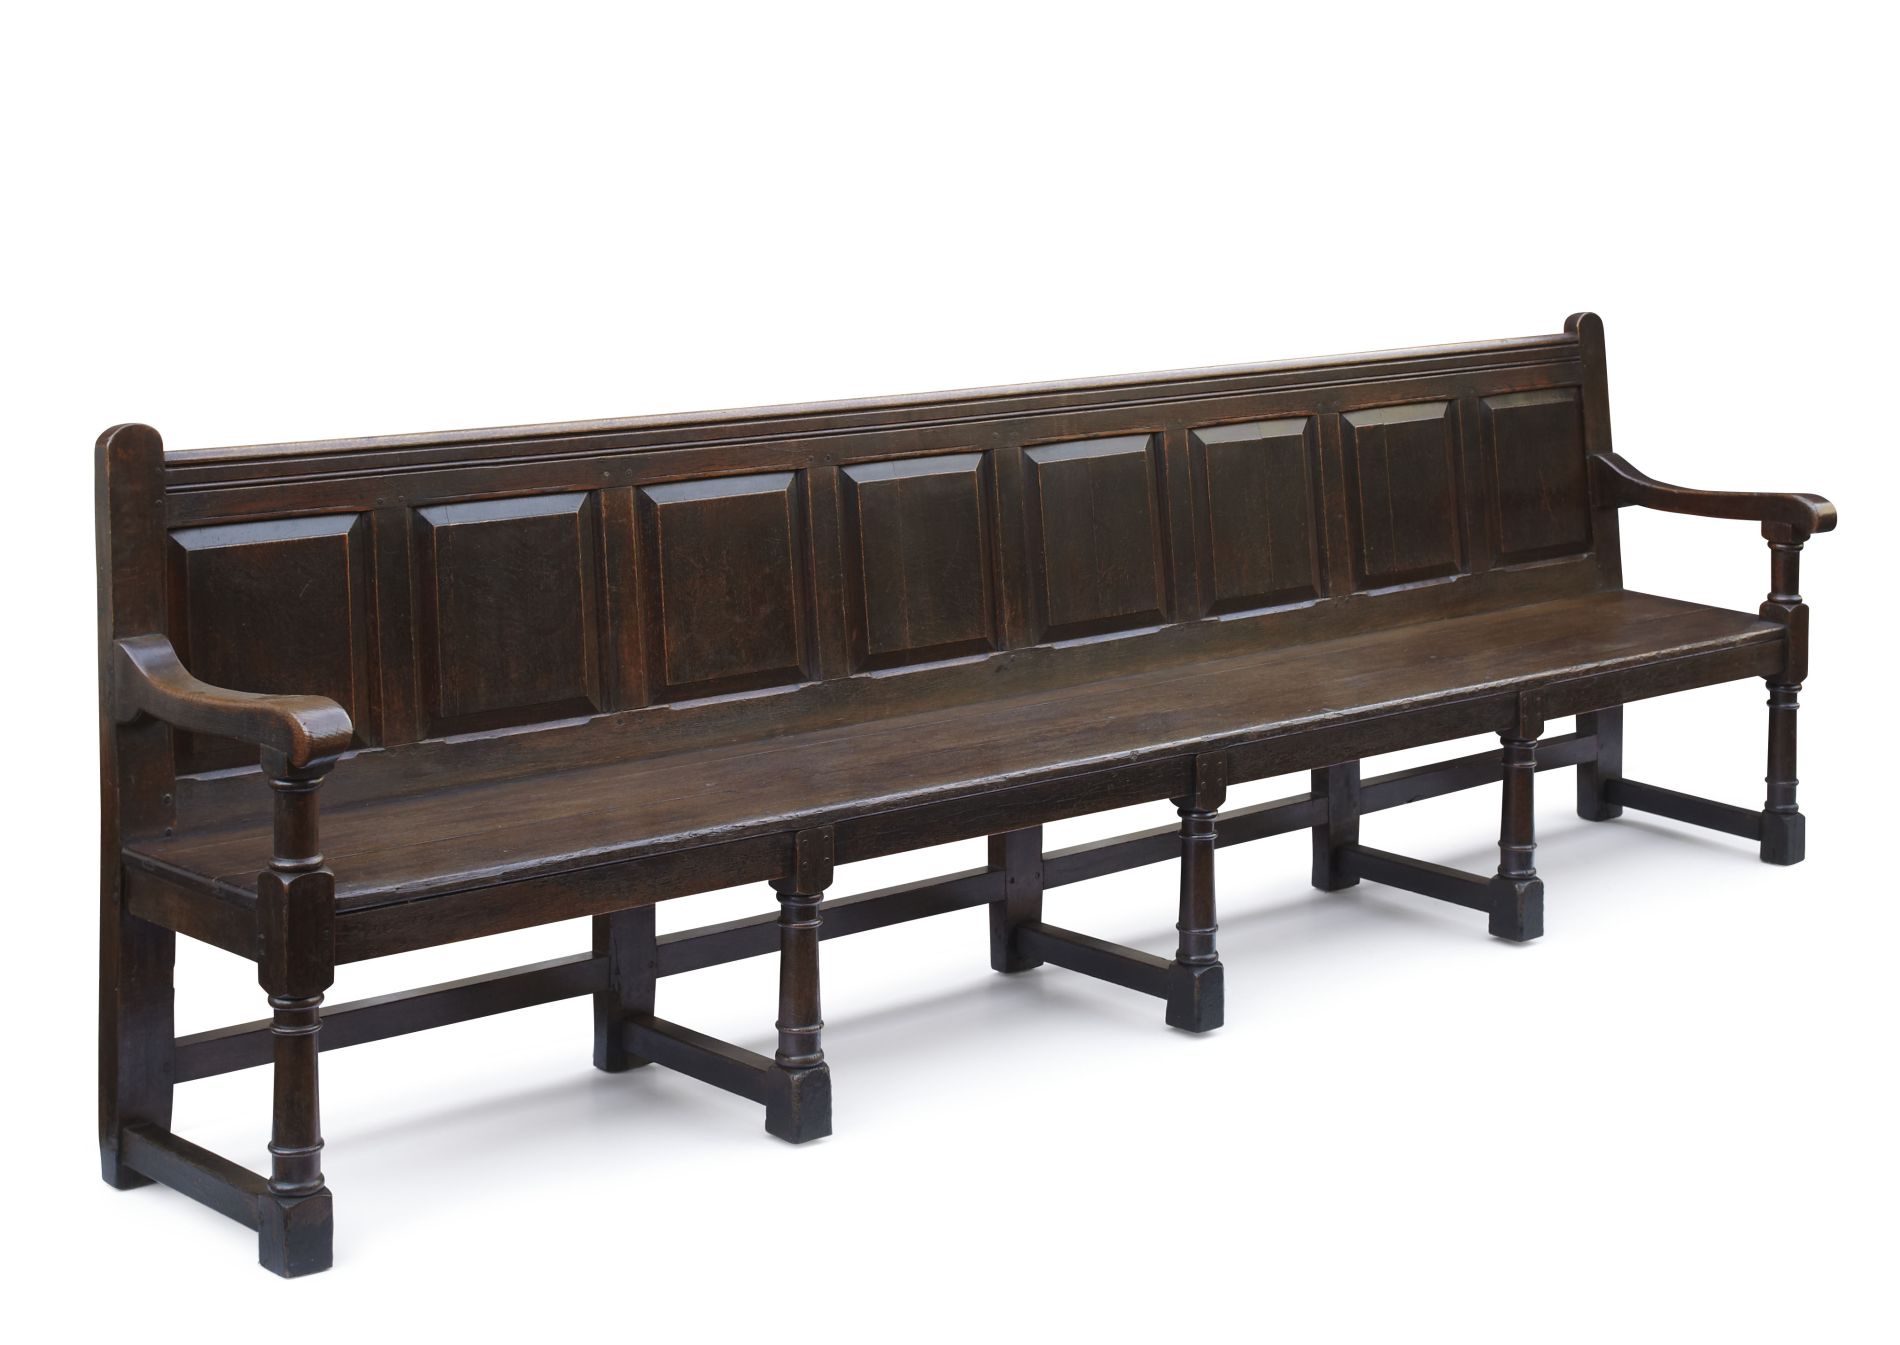 GEORGE III OAK HALL BENCH 18TH CENTURY the low rectangular back with eight panels and scroll arms